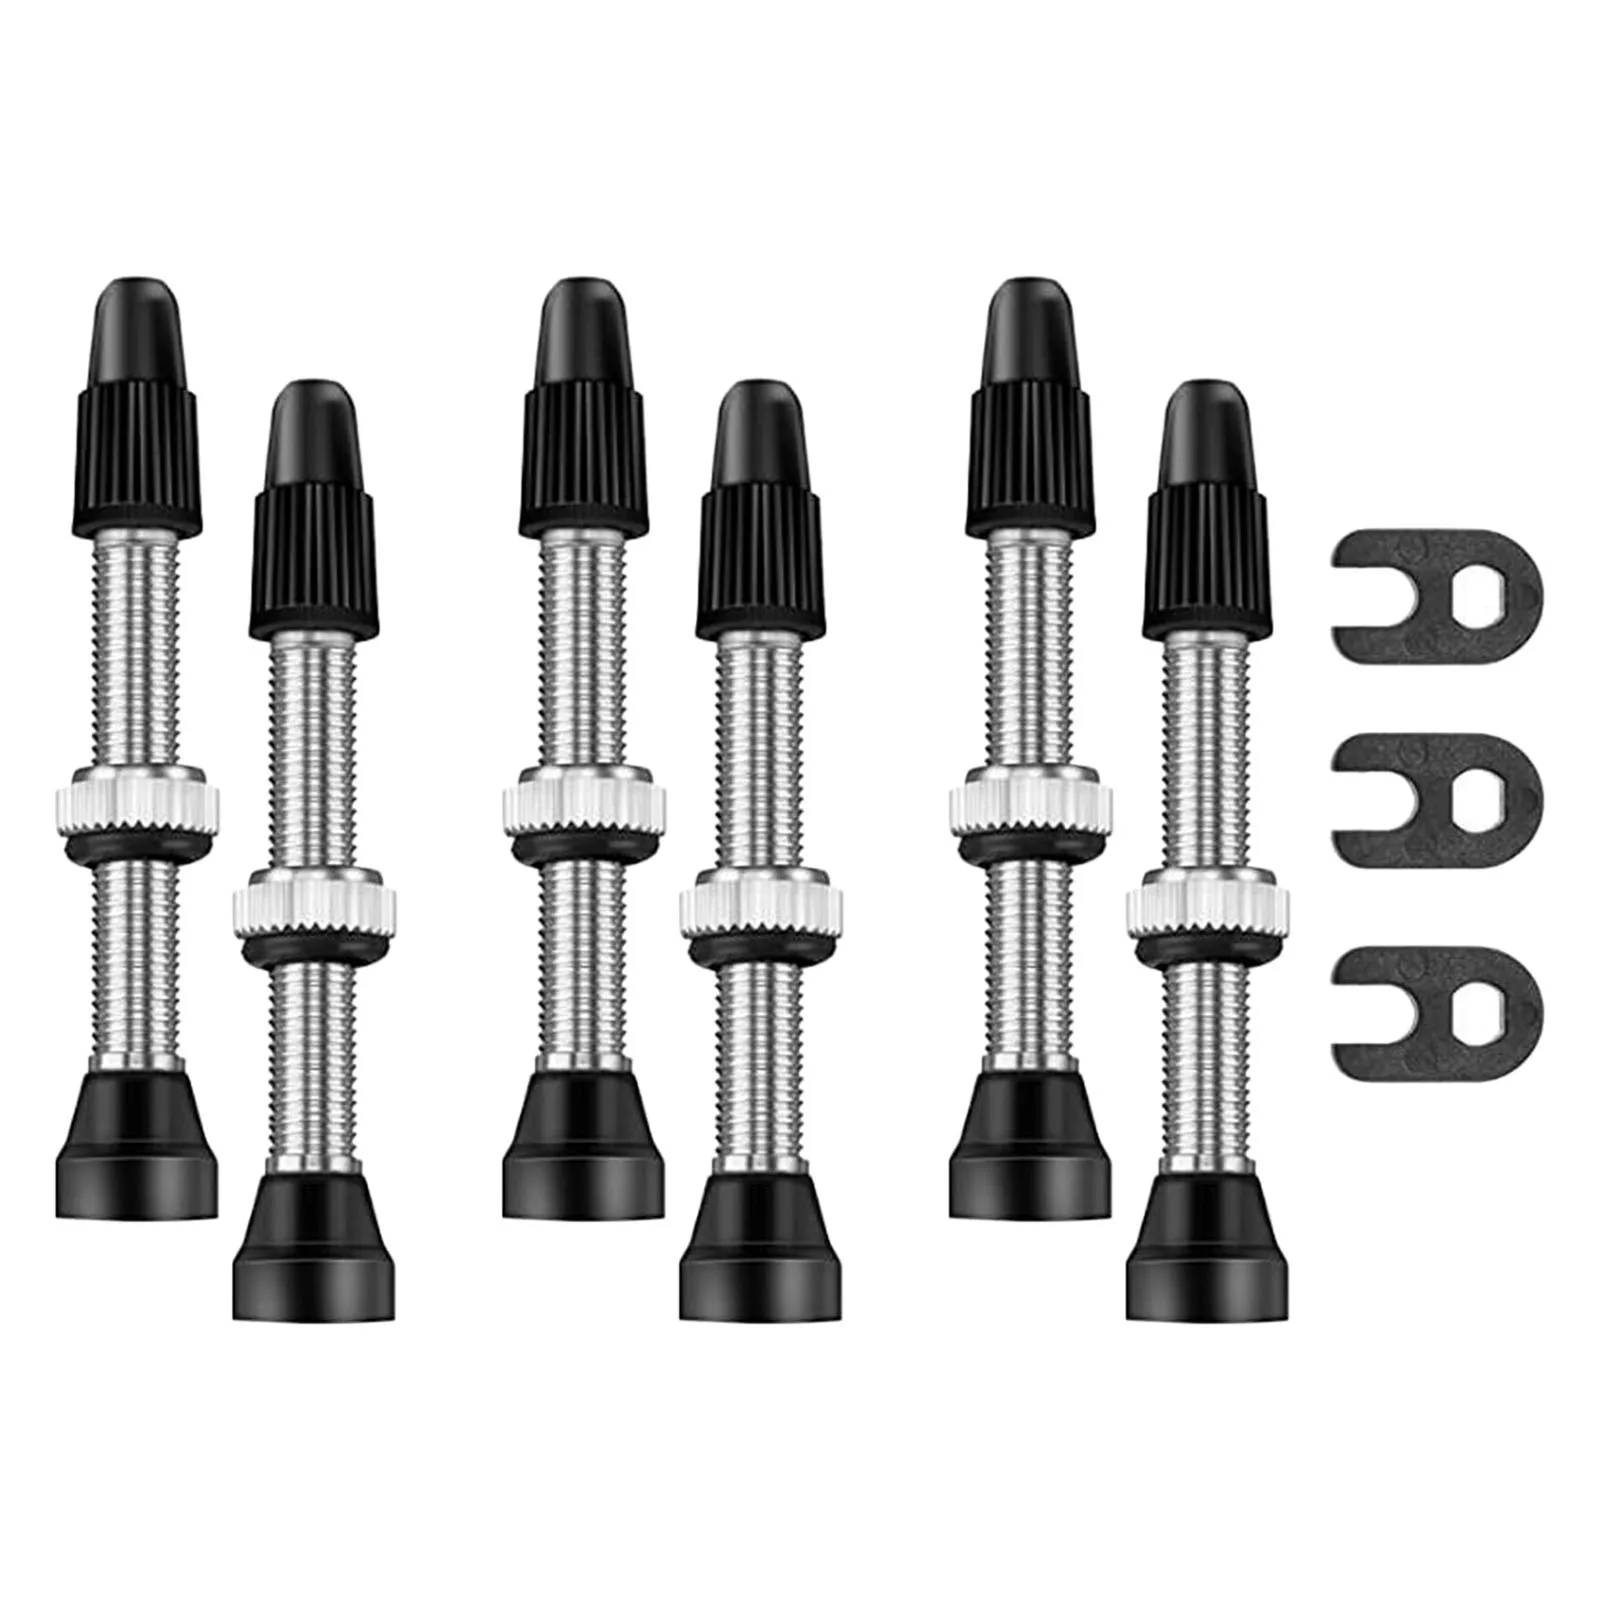 40mm Presta Valve Stem Kit Tubeless with Valve Core Remover Tool and Caps Lightweight for MTB Road Bike Repair Accessories